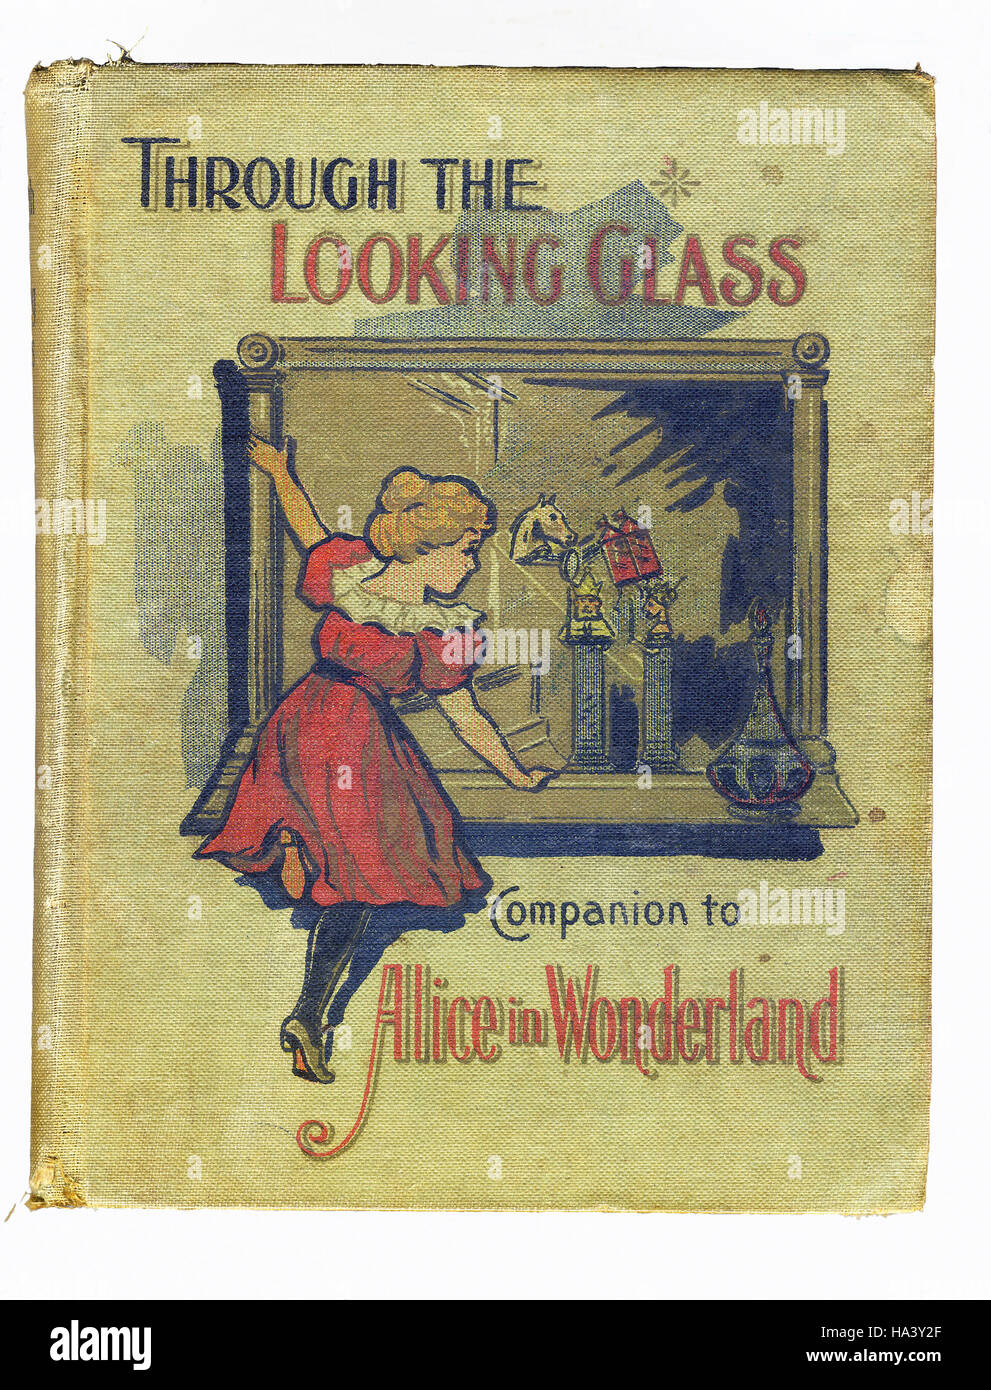 This is a scene from what Alice saw once she went through the Looking Glass and into the Looking Glass room in Lewis Carroll's 'Through the Looking Glass.' Pictured here is the cover of Carroll's work. Stock Photo